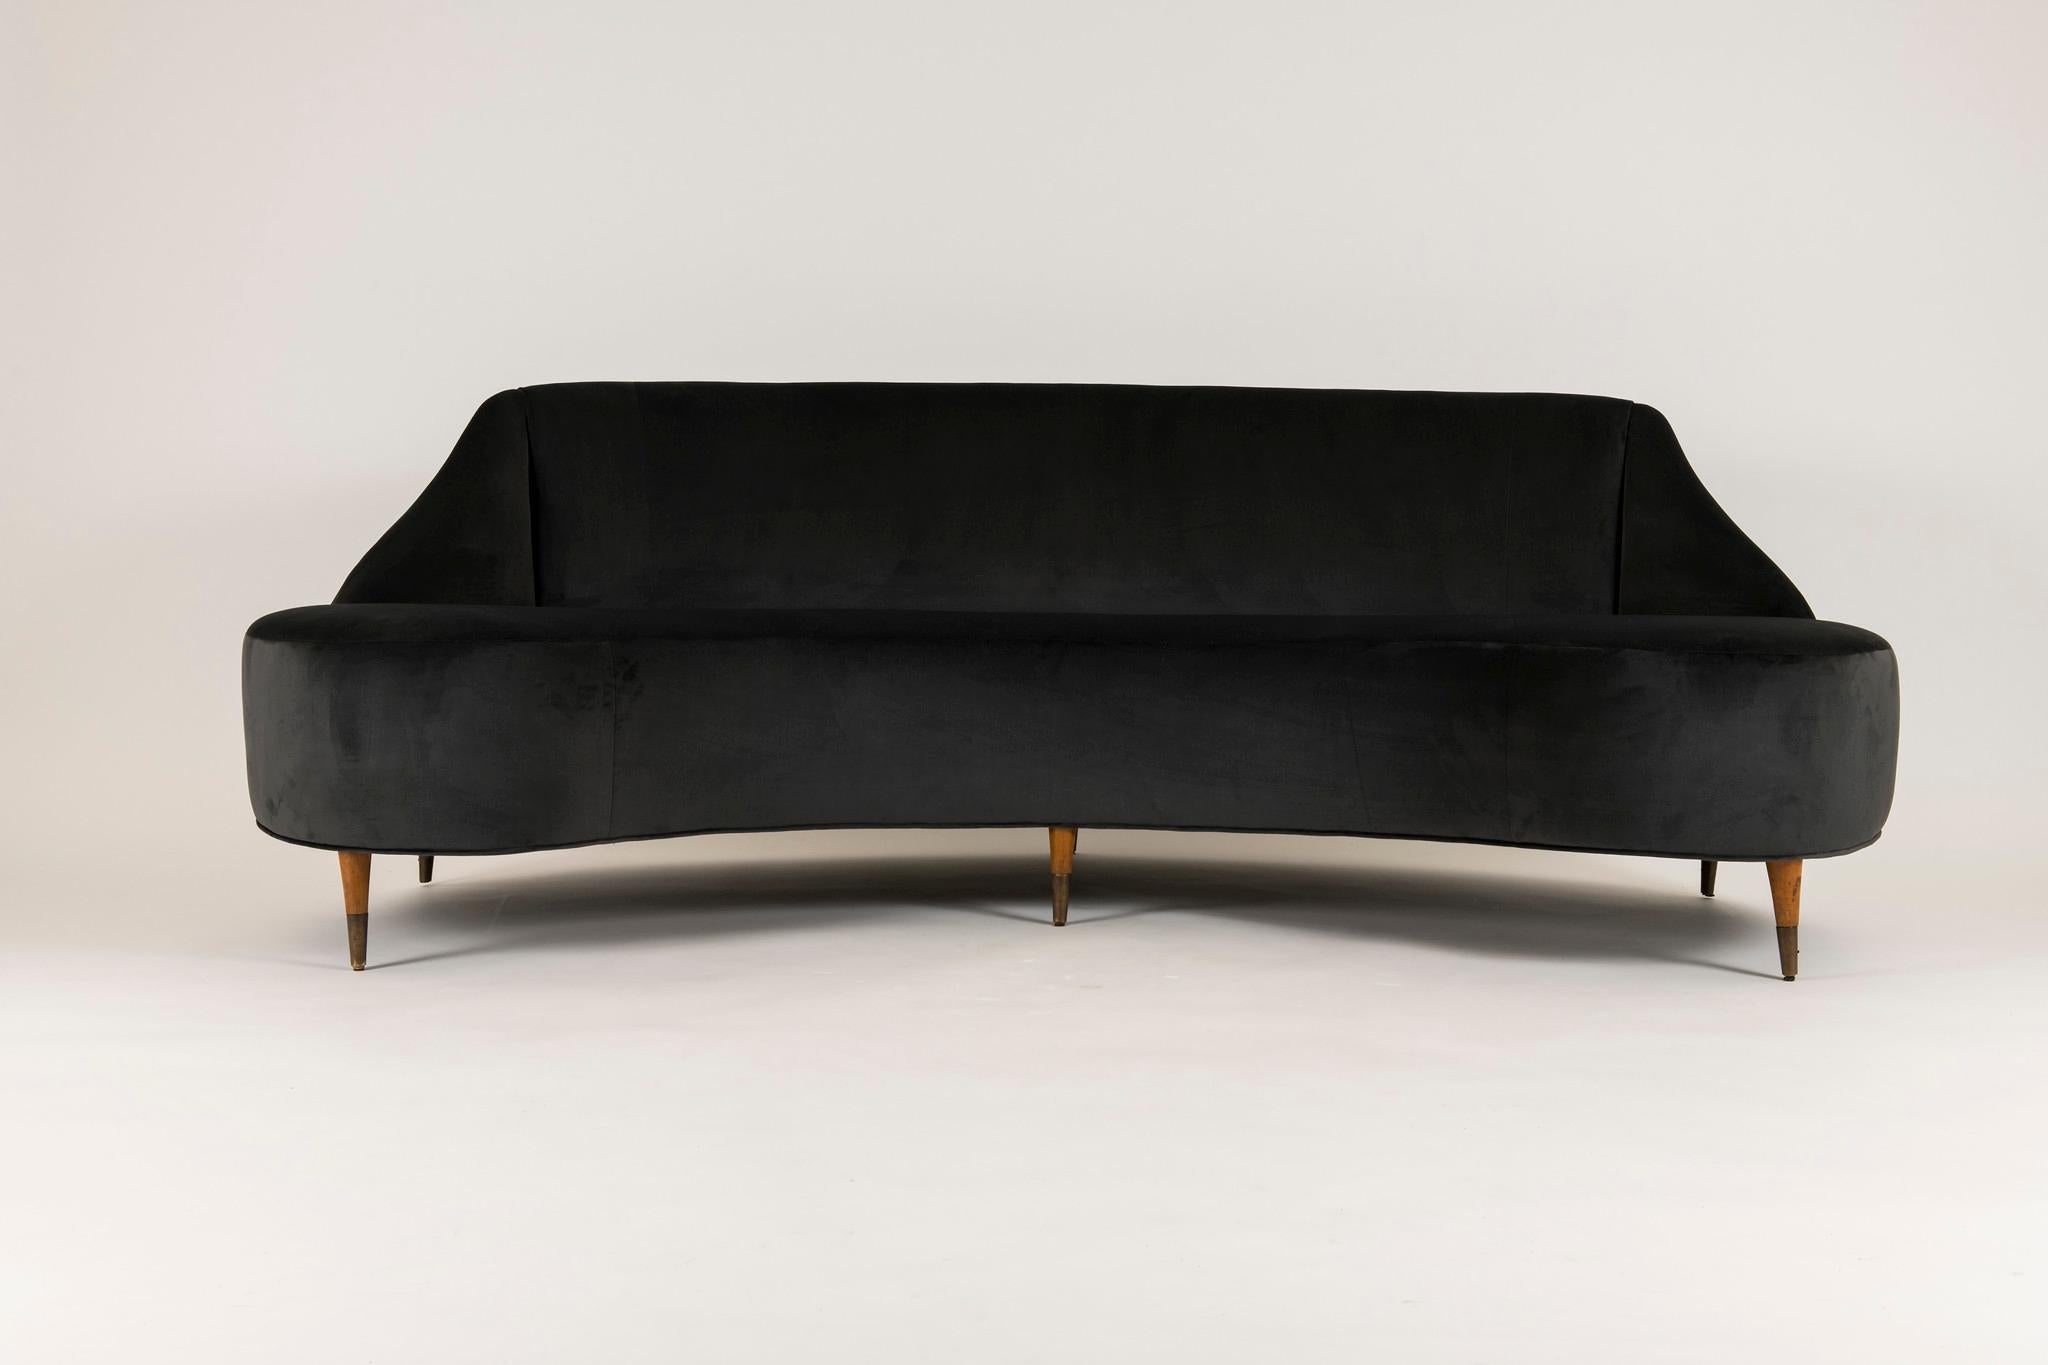 A low lying 1950s Italian curved back sofa with wooden legs and brass sabots, professionally upholstered in a contemporary charcoal velvet. 

Inside Seat Depth: 18.75